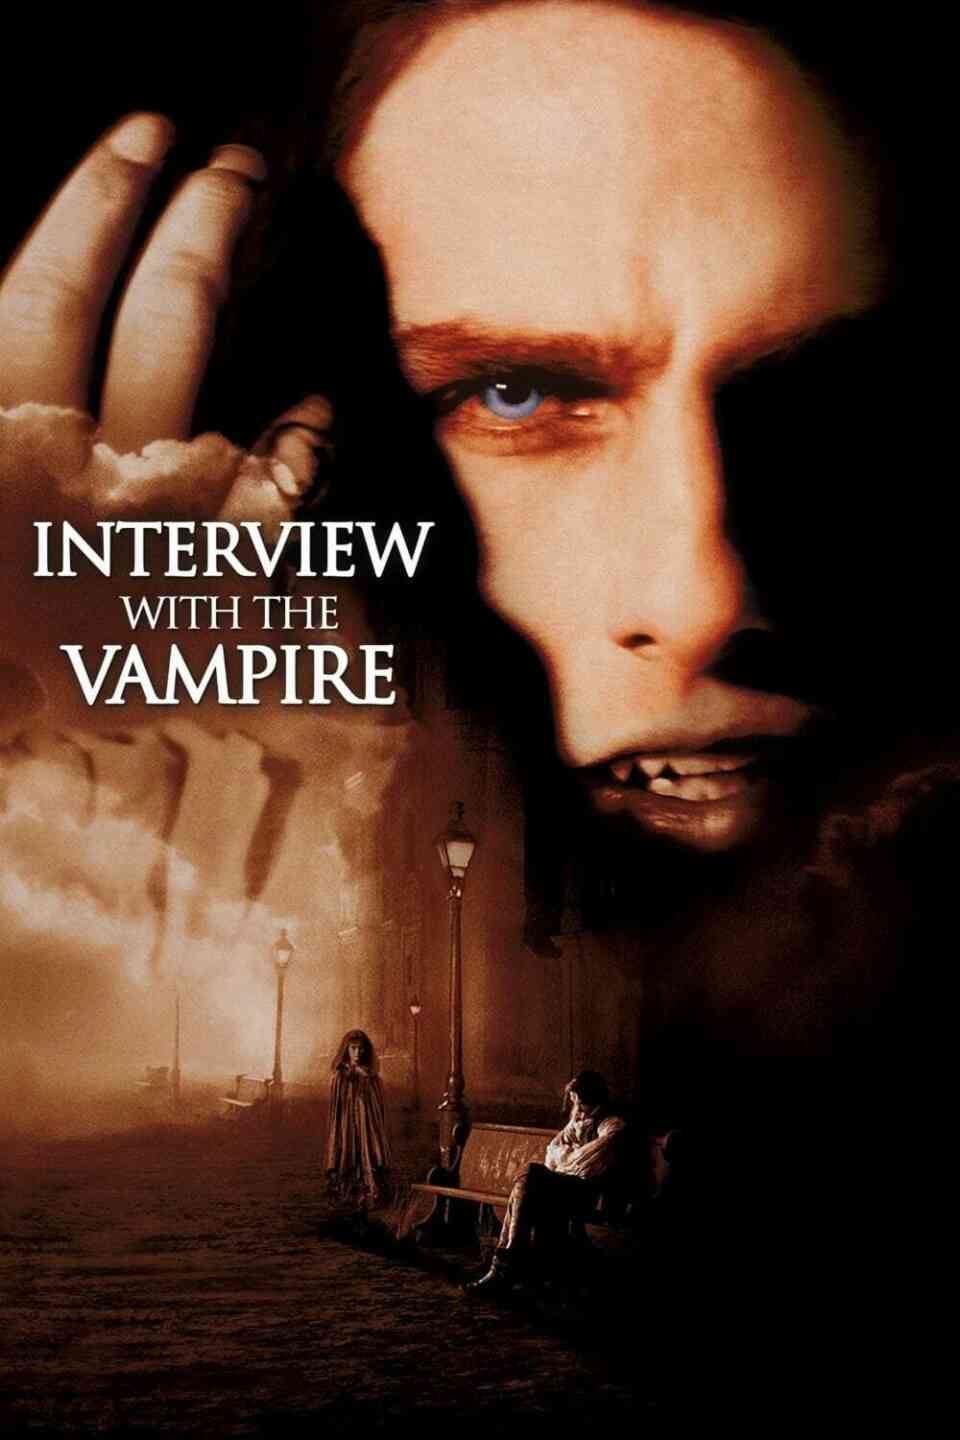 Read Interview with the Vampire screenplay.